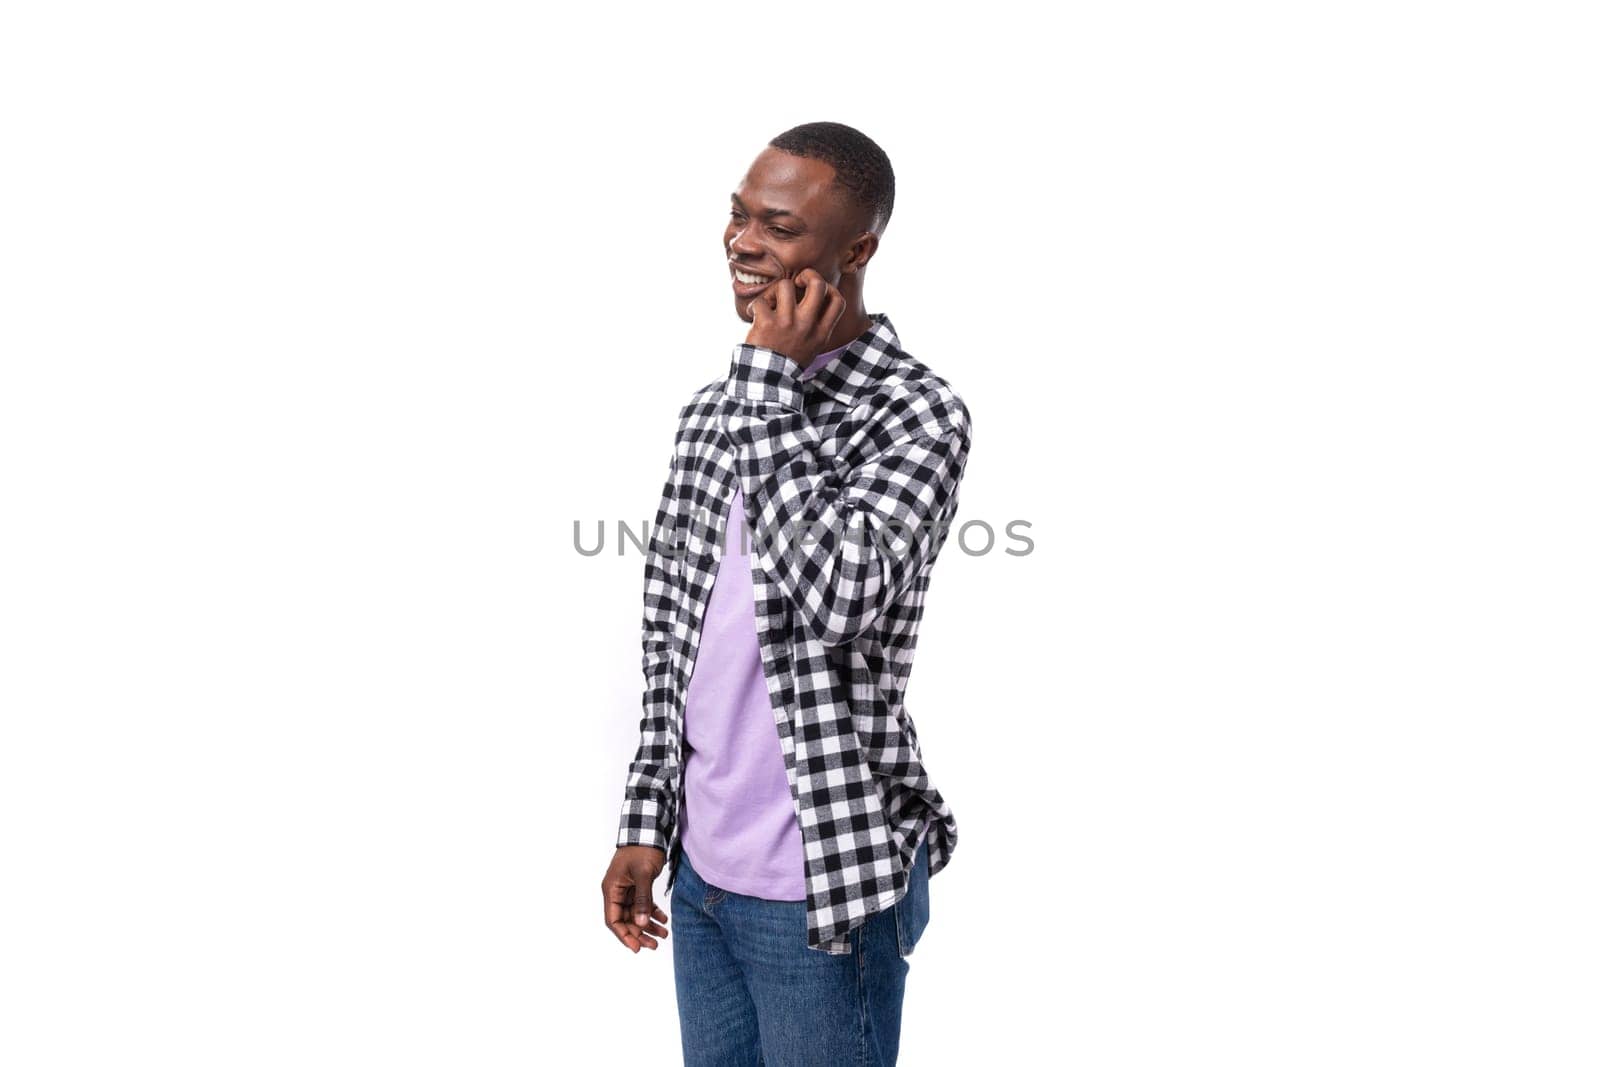 modest shy young american guy with short haircut dressed casually on white background with copy space.